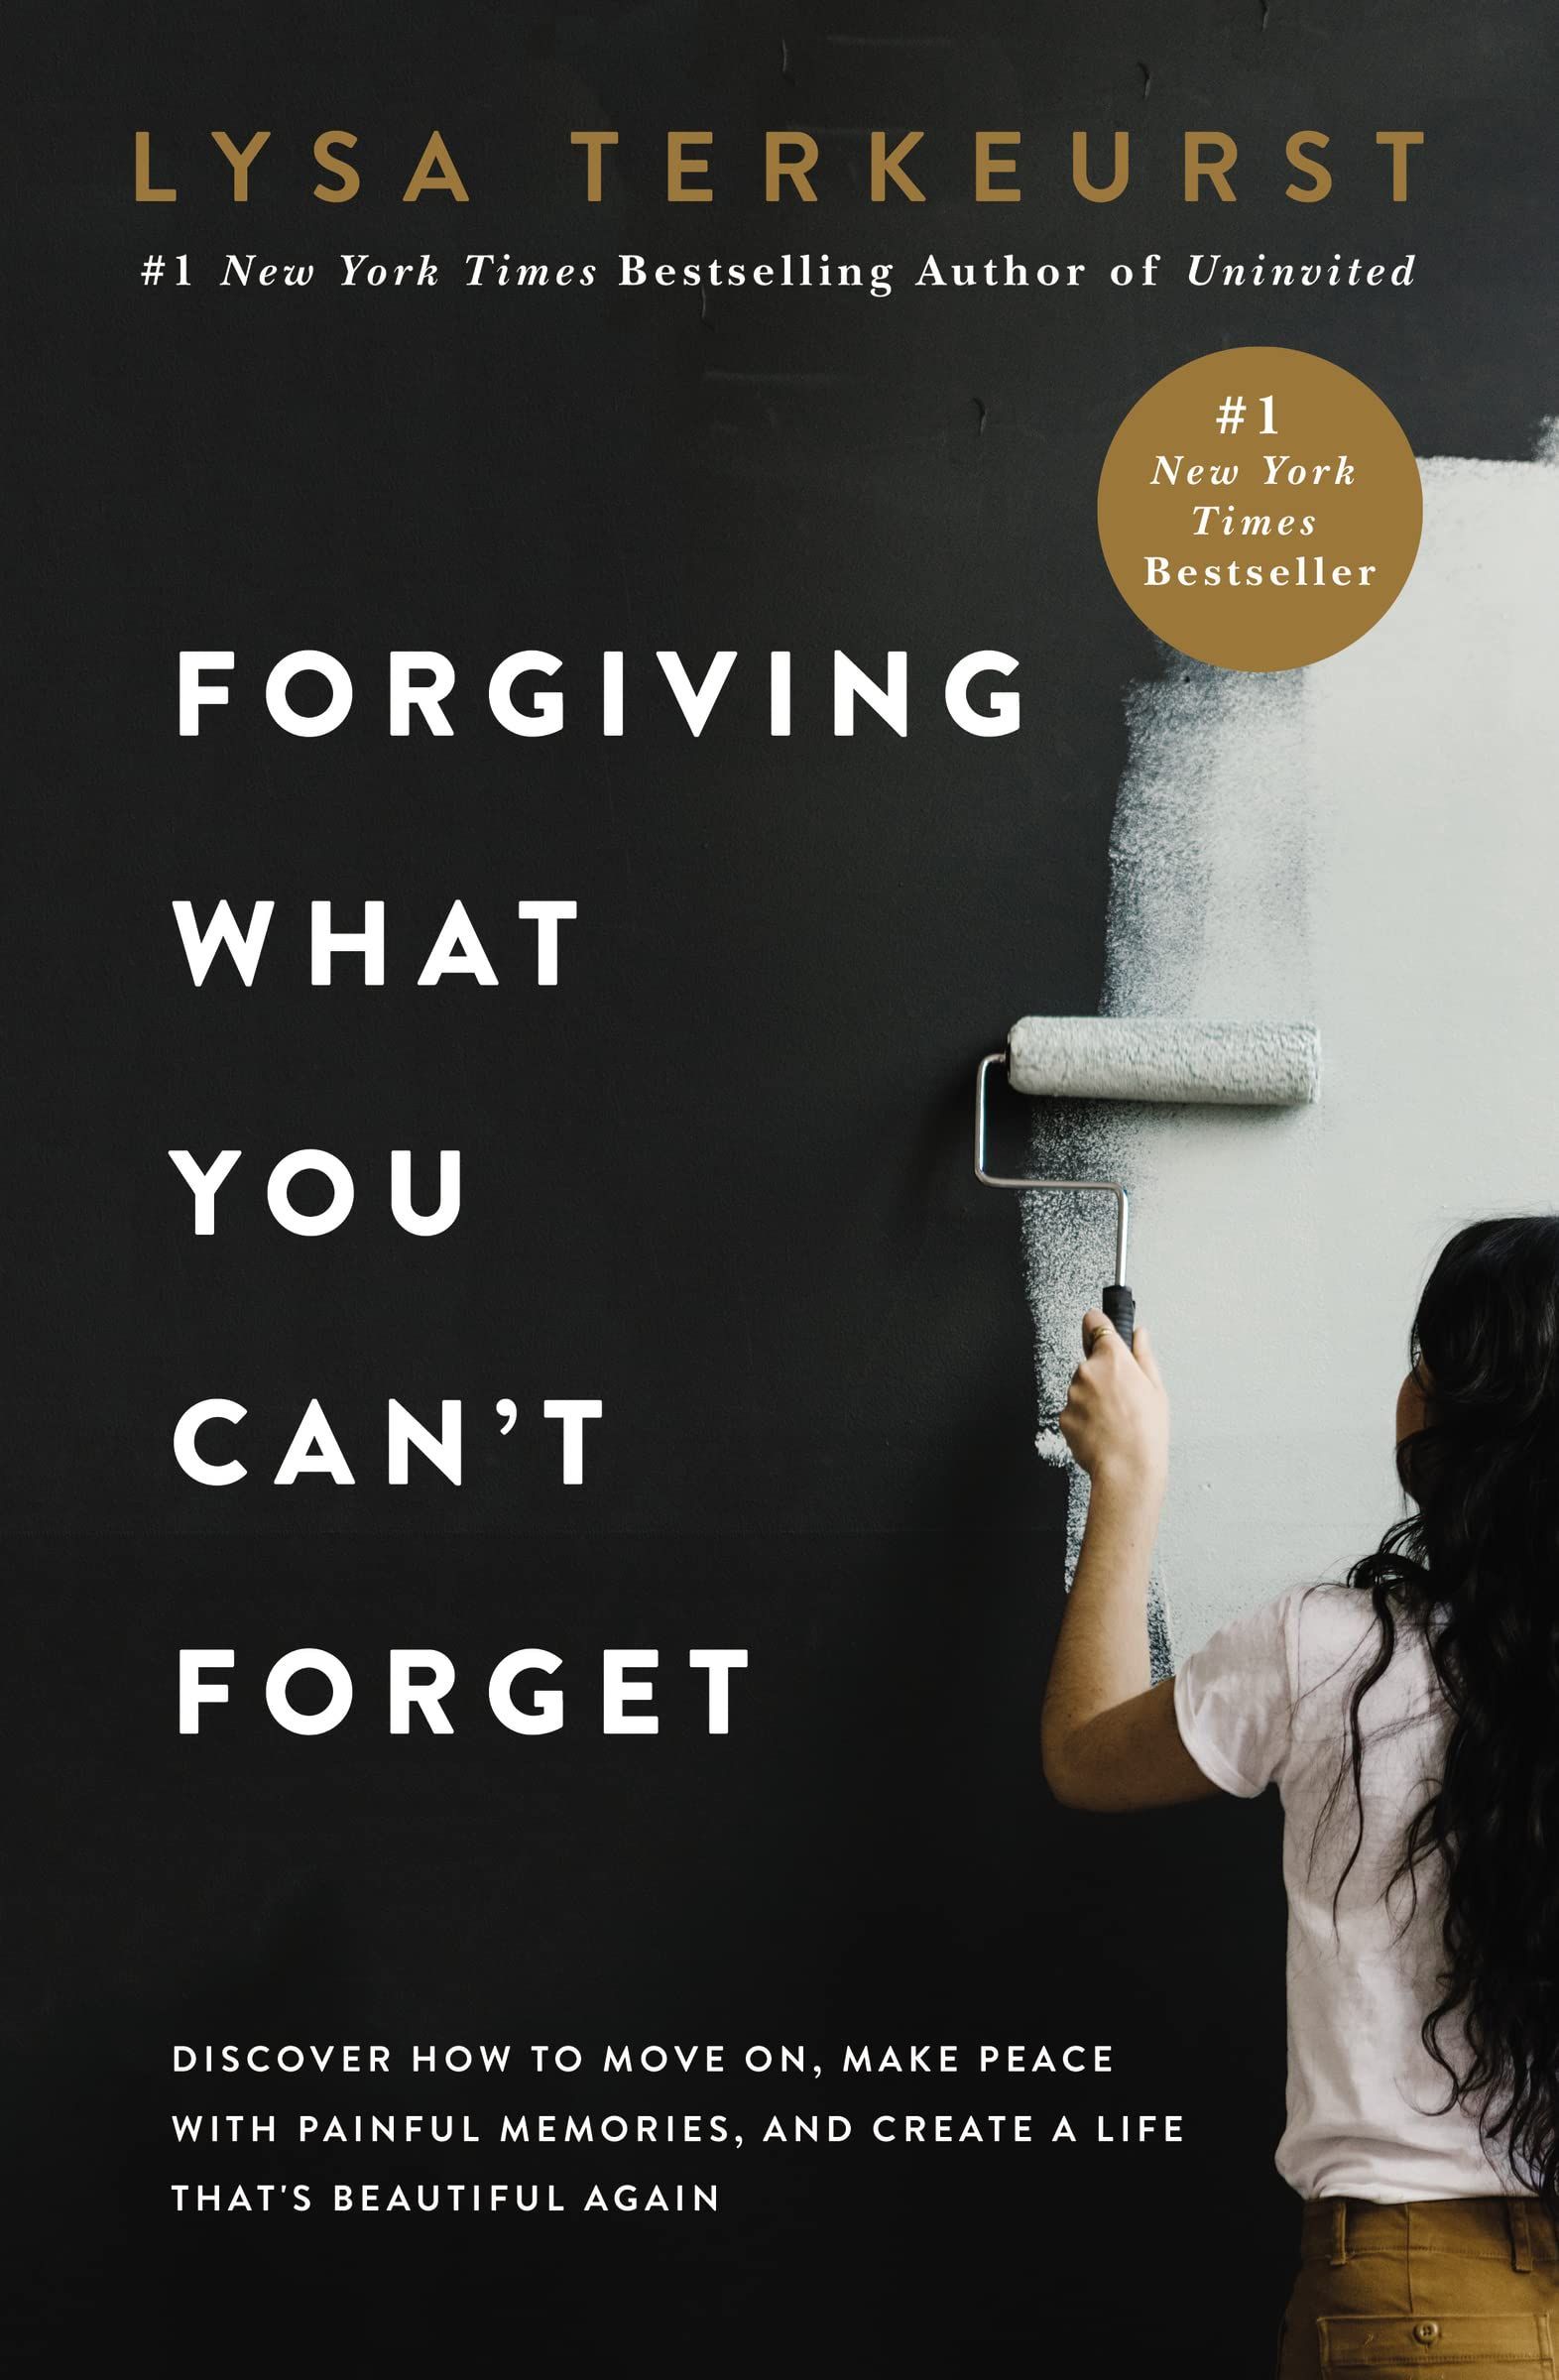 'Forgiving What You Can't Forget' by Lysa TerKeurst